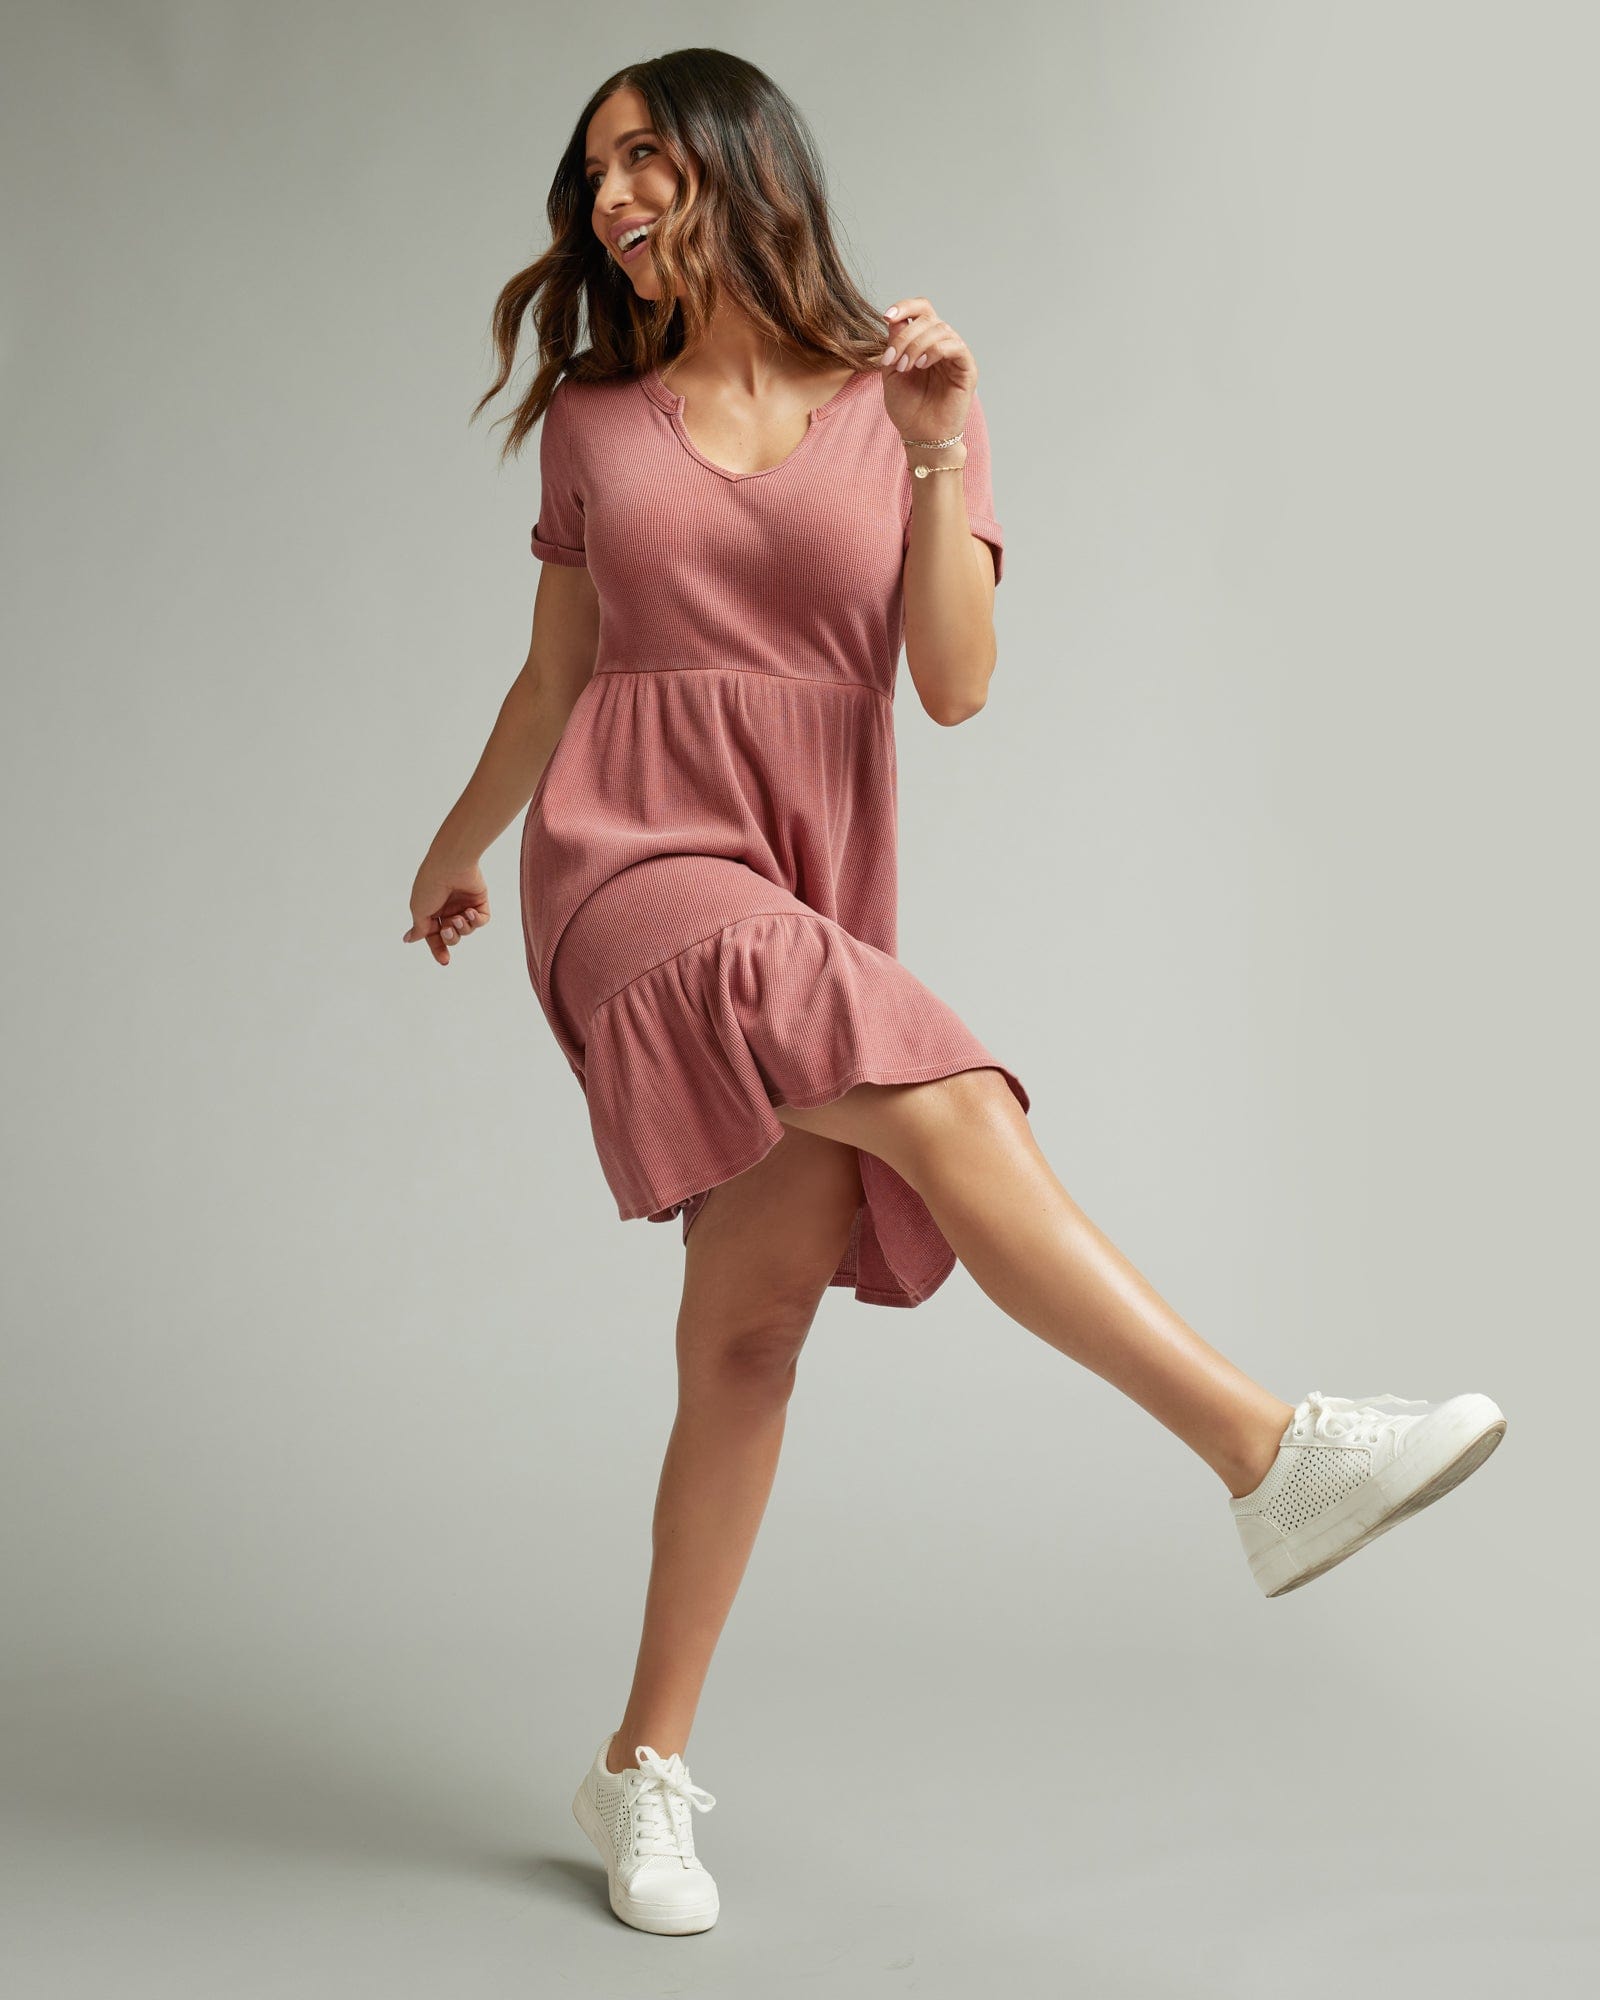 Woman in a short sleeve, waffled textured dress